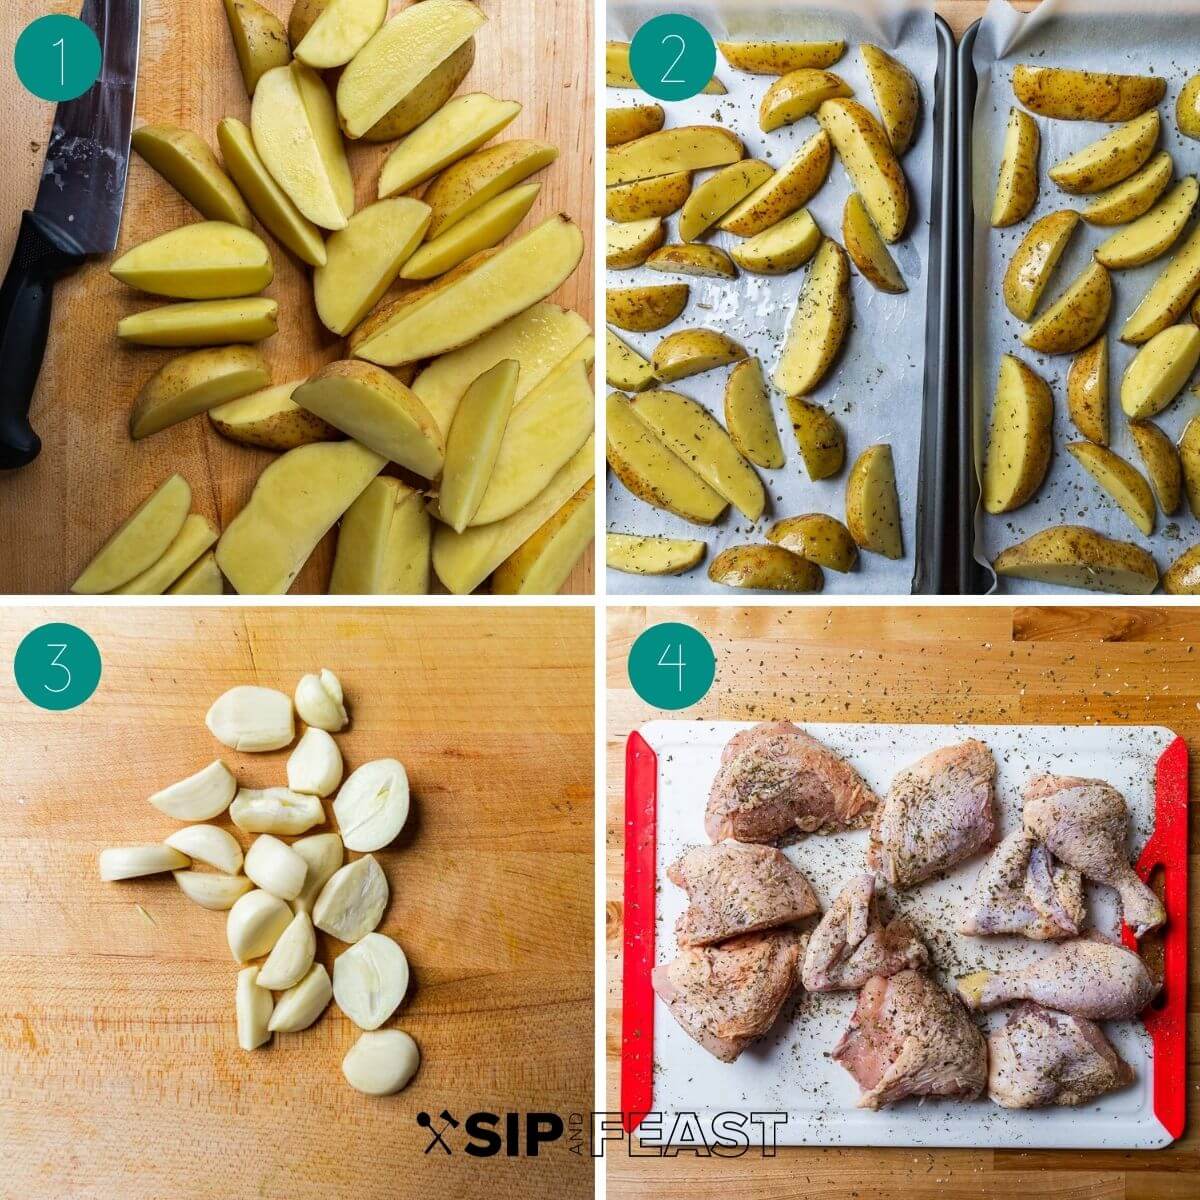 Chicken vesuvio recipe process shot collage group number one with potato wedges on baking sheet, sliced onion, and seasoned raw chicken pieces.